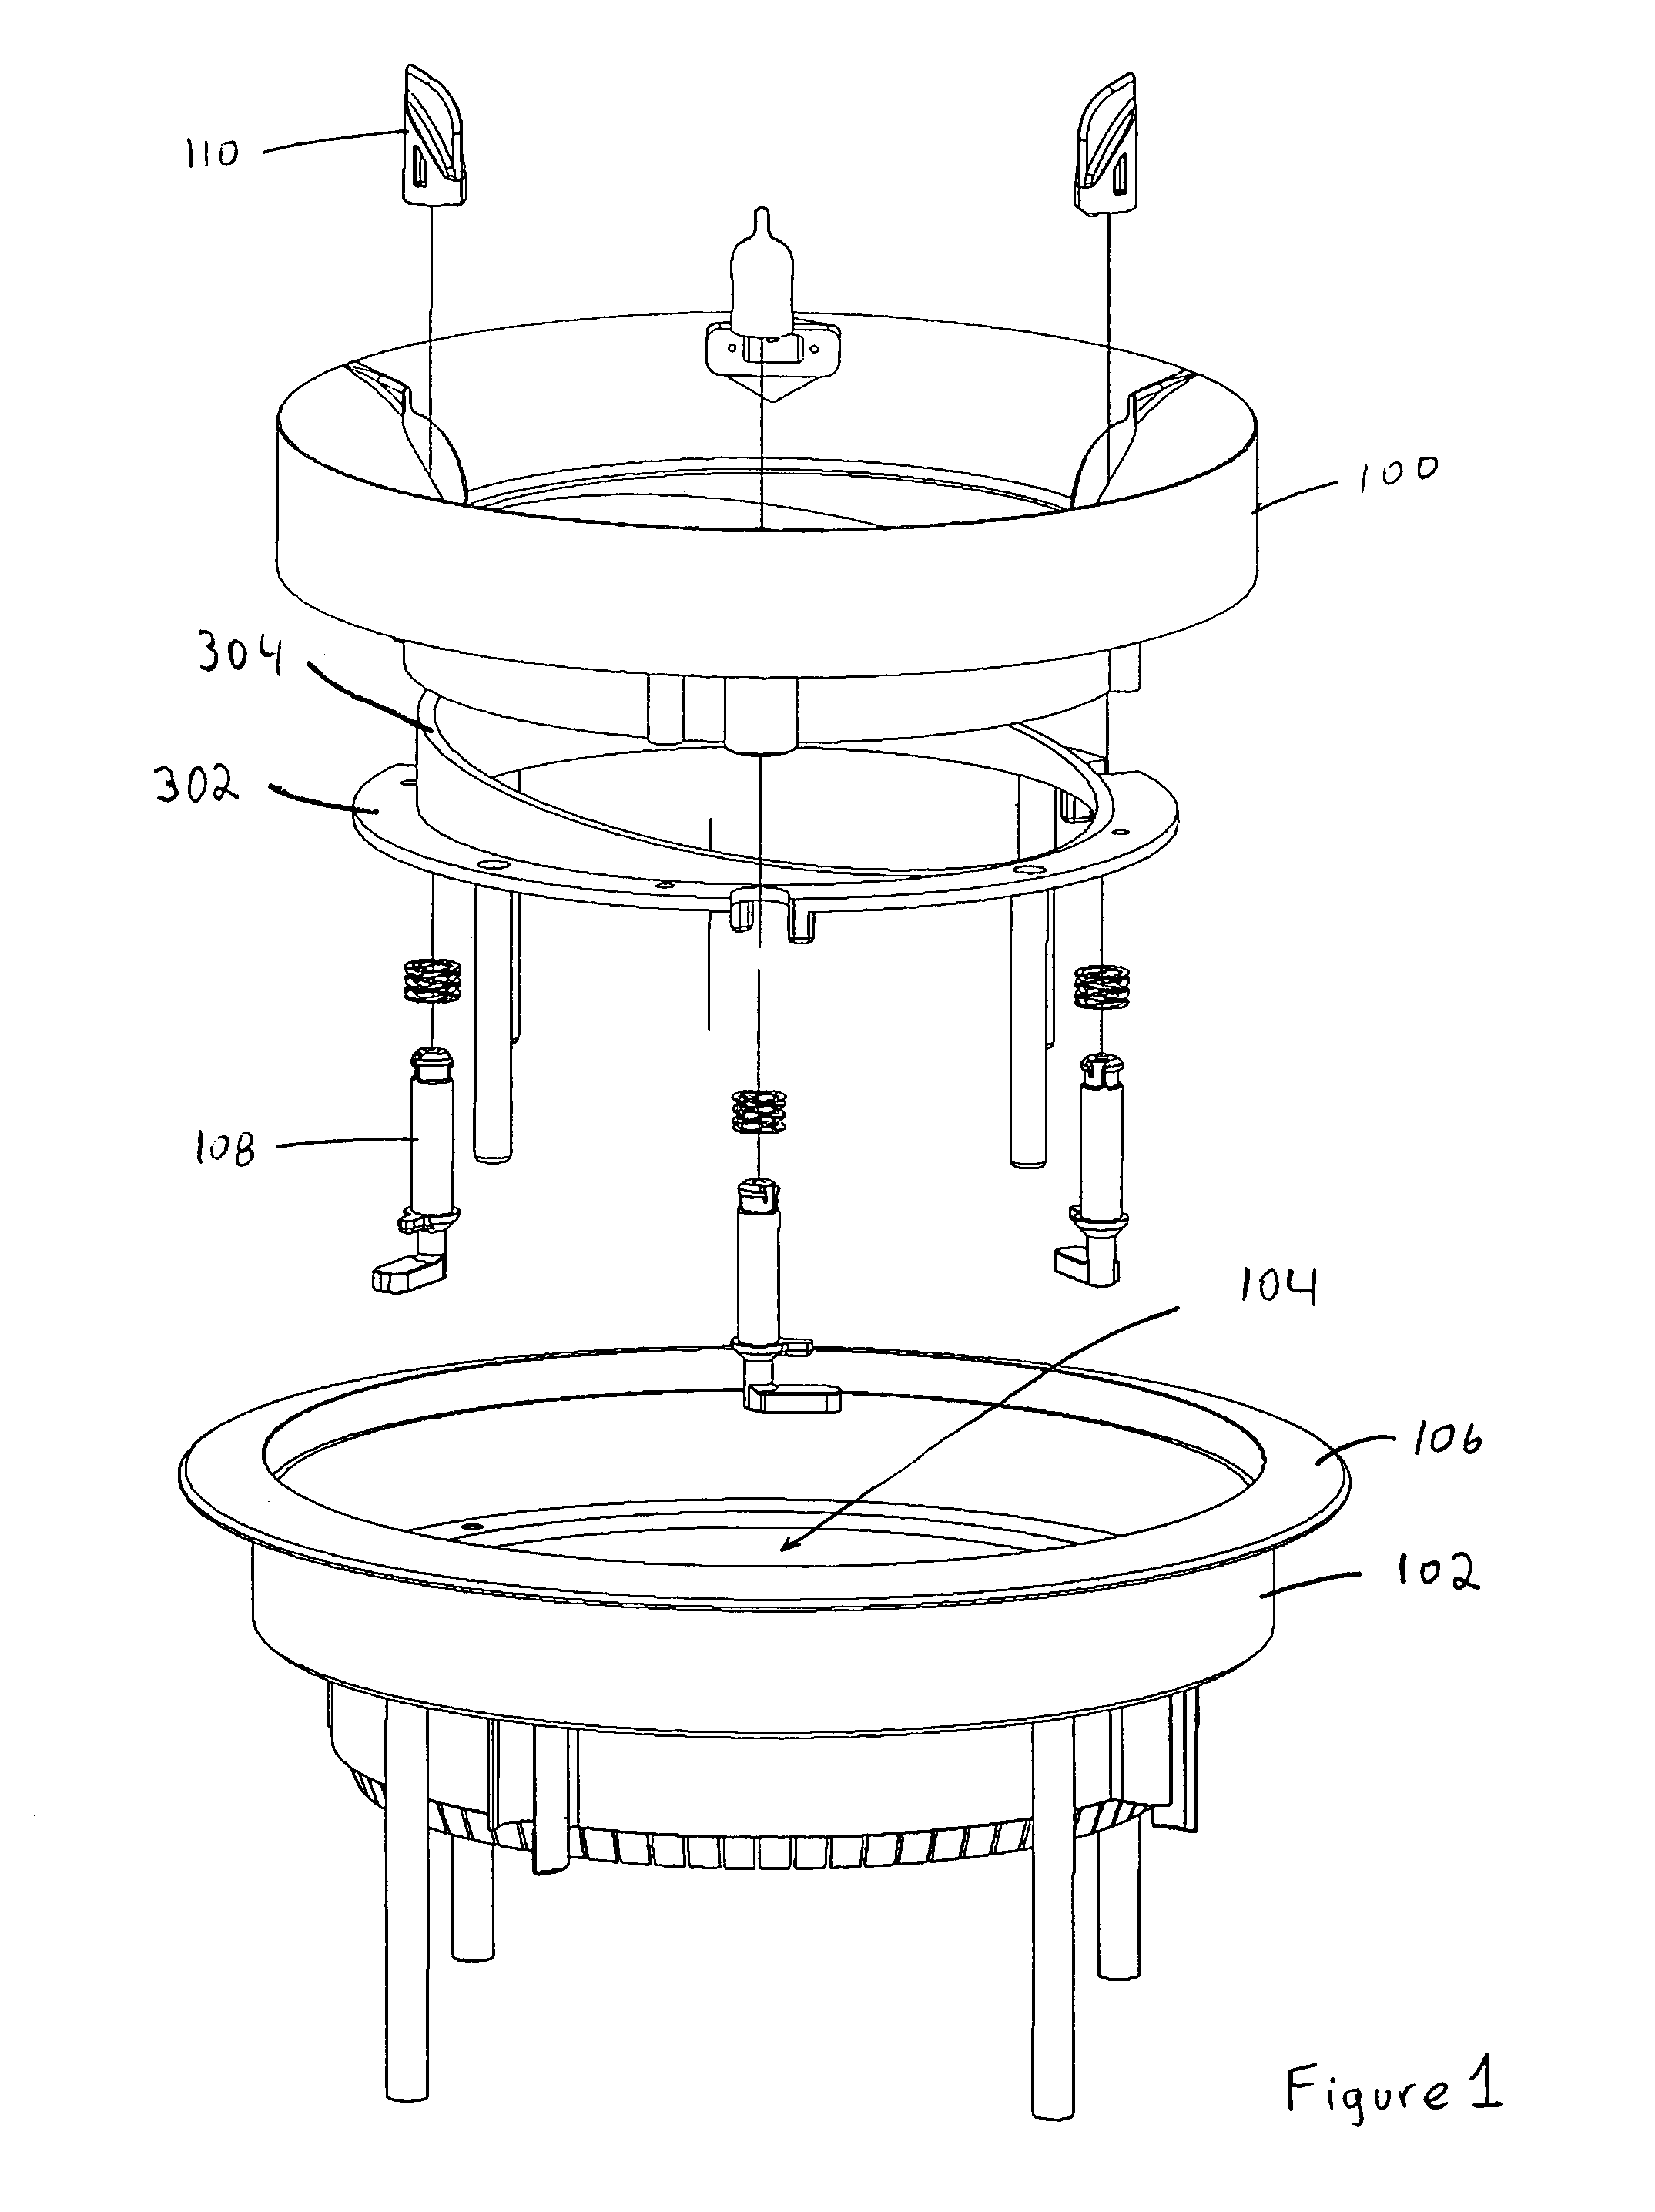 Snap-in and lock baffle